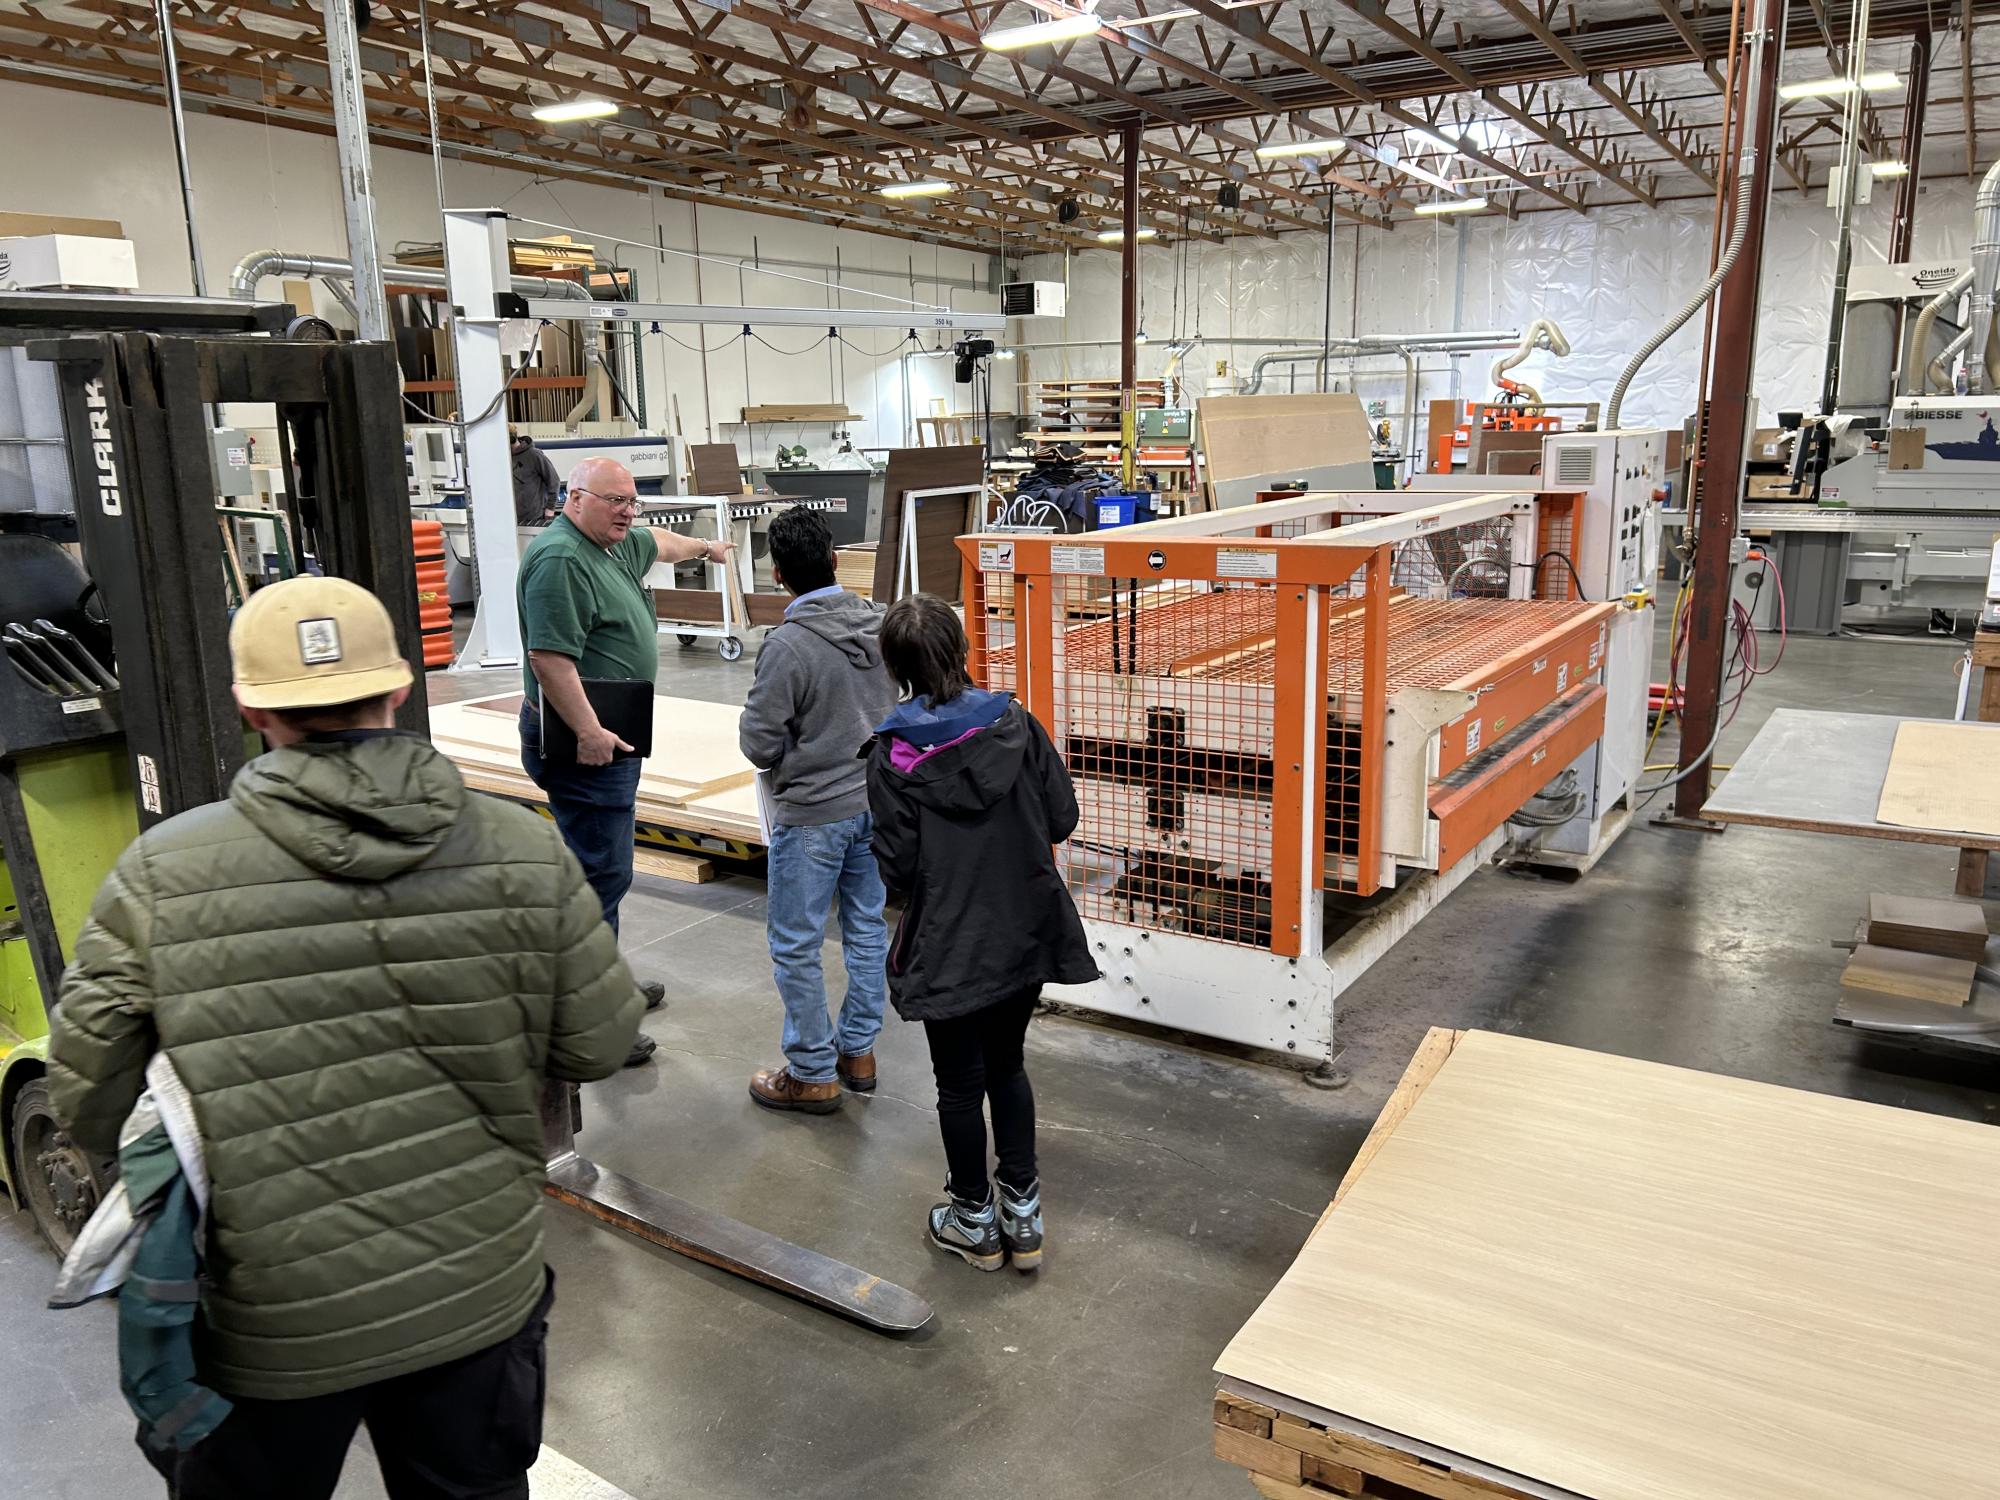 A group of people in a manufacturing facility